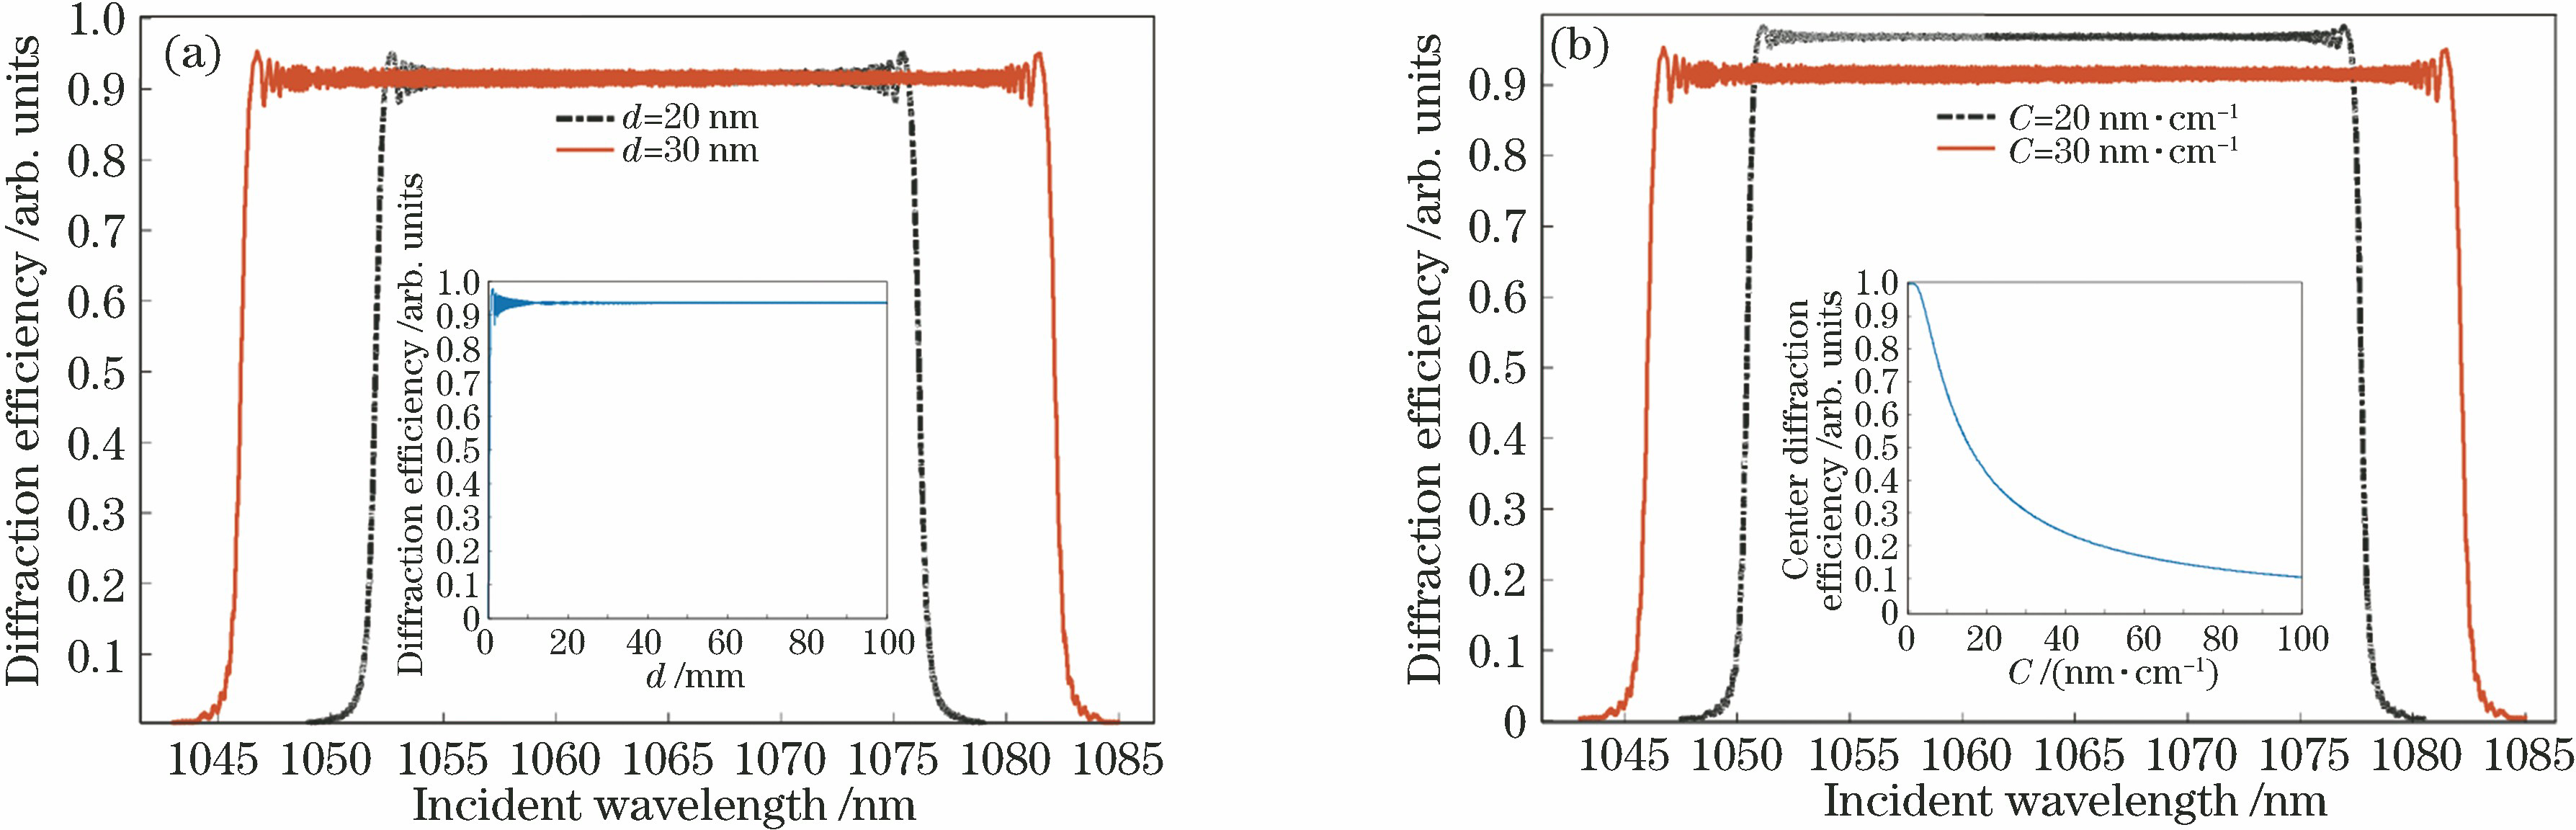 Diffraction characteristics of CVBG. (a) Diffraction spectra curves of CVBG with different thicknesses, inset is that central diffraction efficiency as a function of thickness; (b) diffraction spectra curves of CVBG with different chirp rates, inset is that central diffraction efficiency as a function of the chirp rate